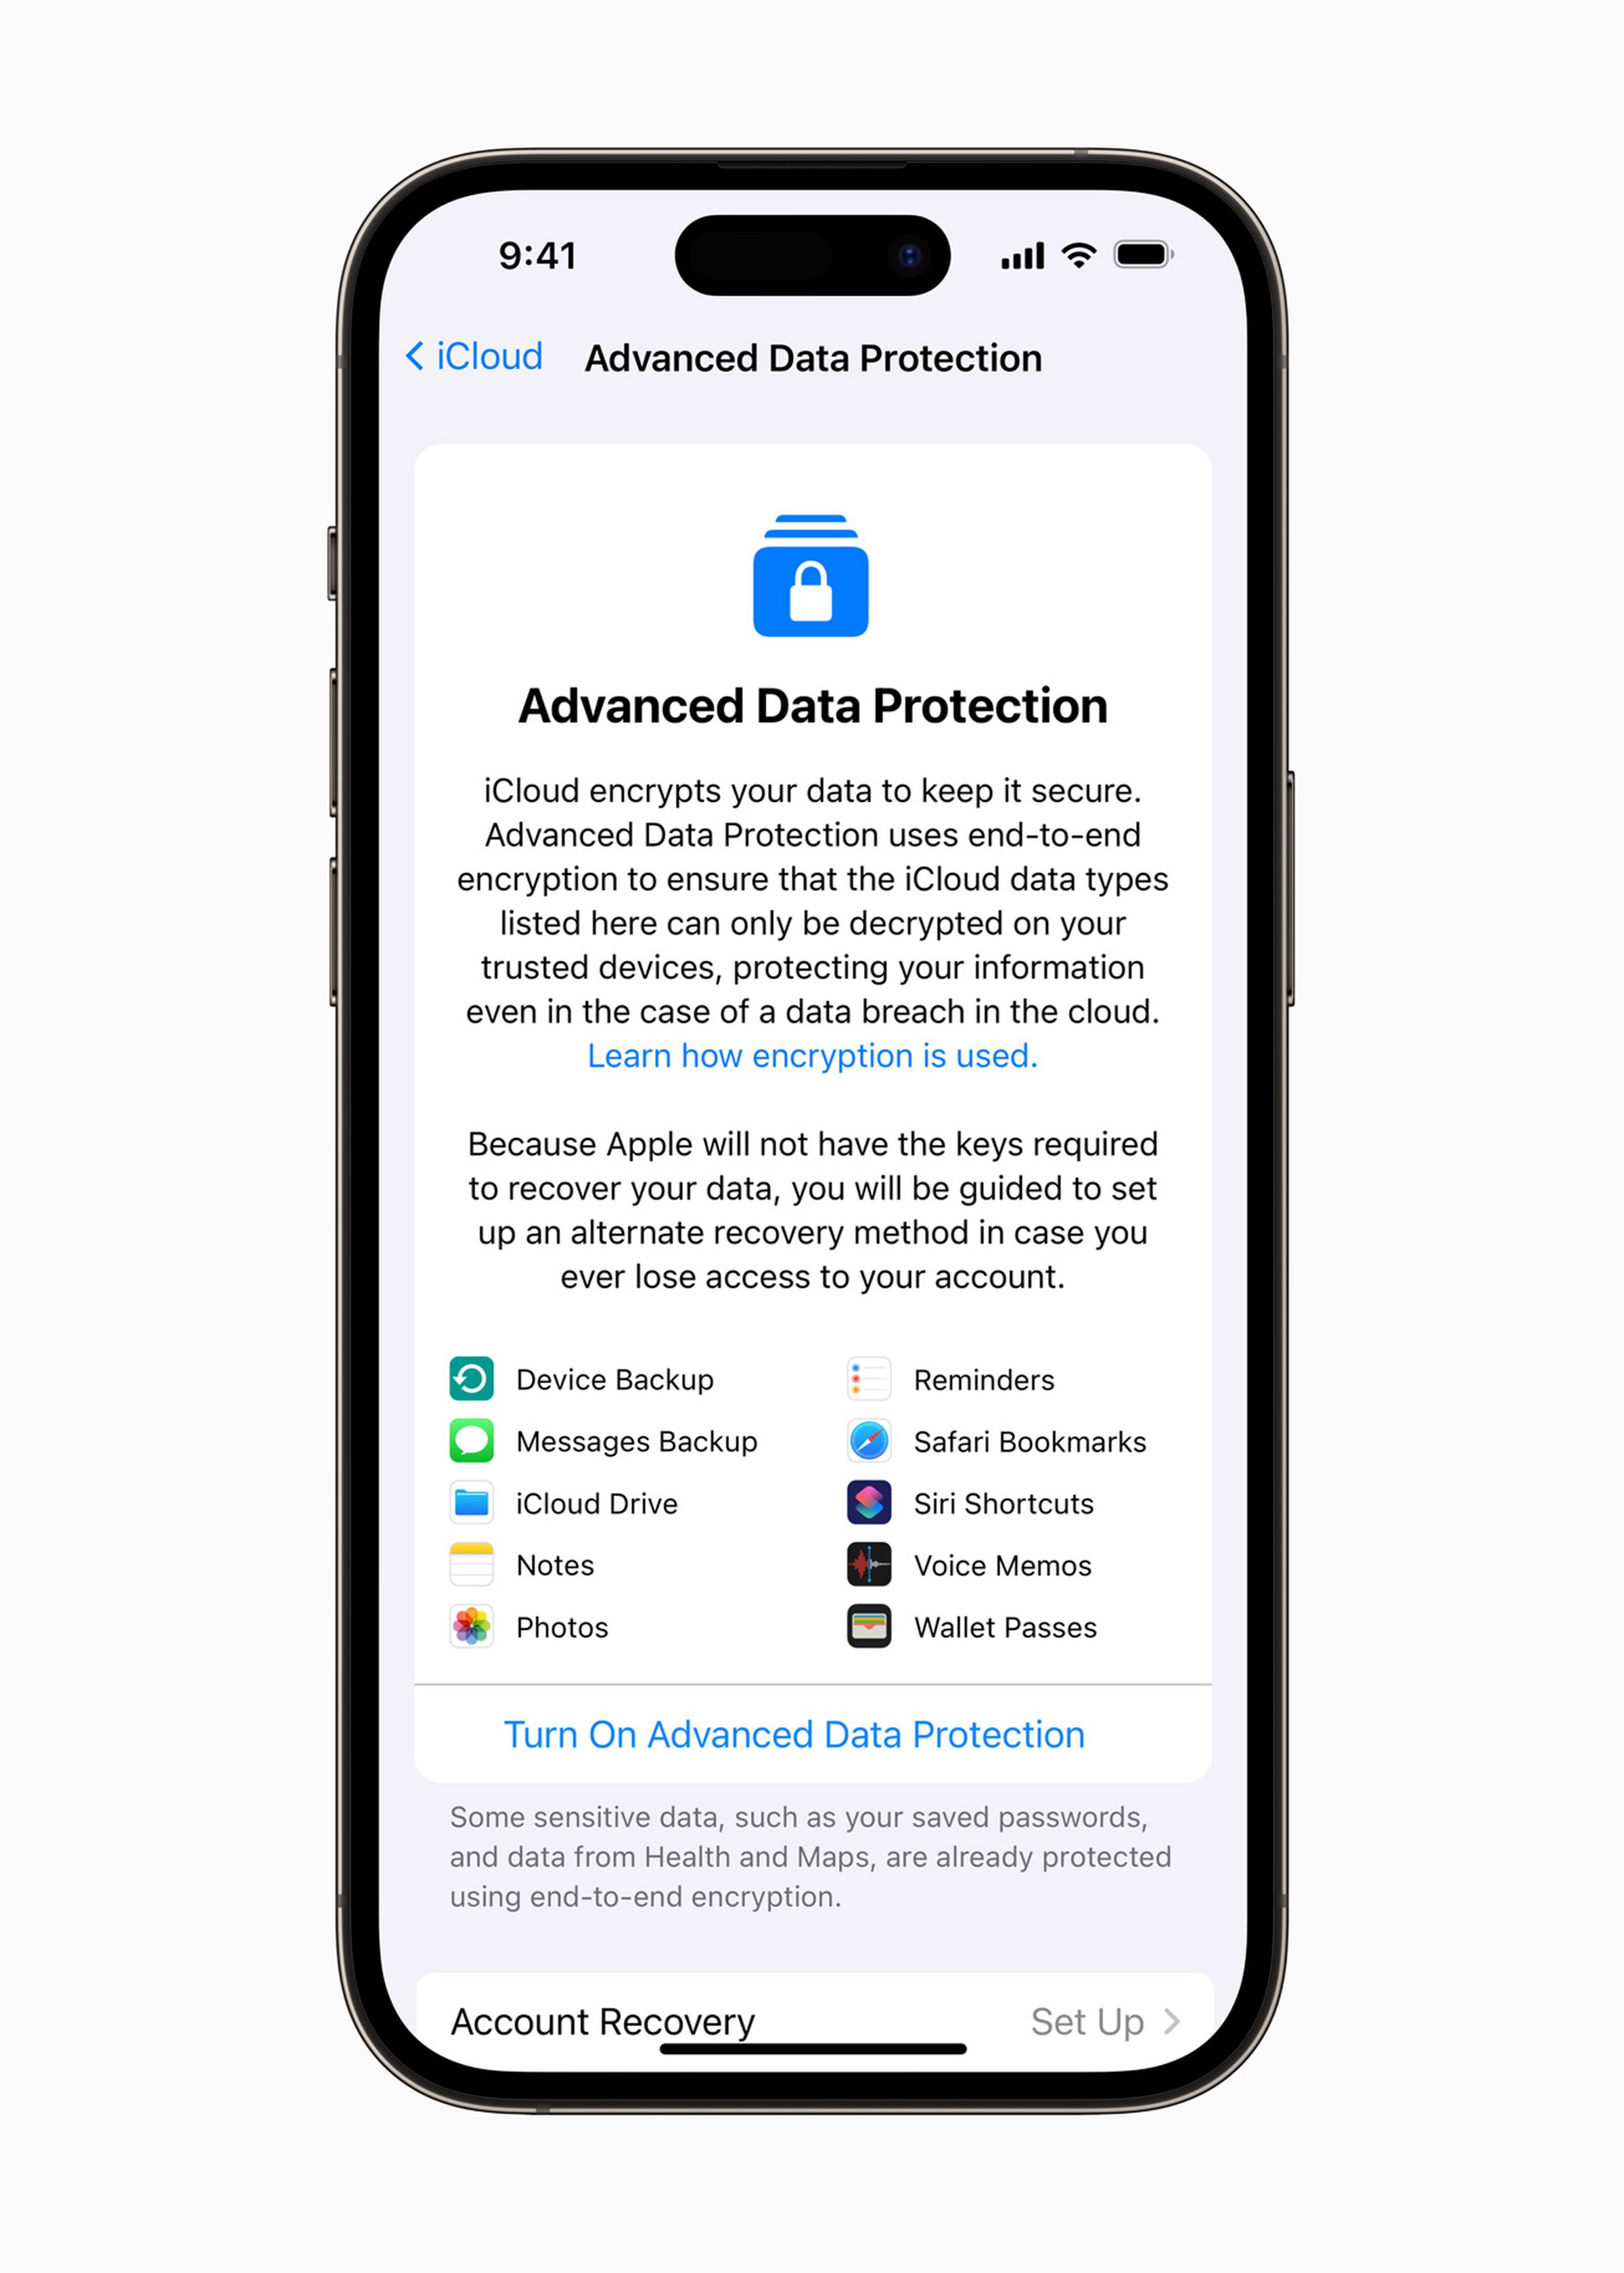 A screenshot from Apple of an iPhone showing details about Advanced Data Protection.